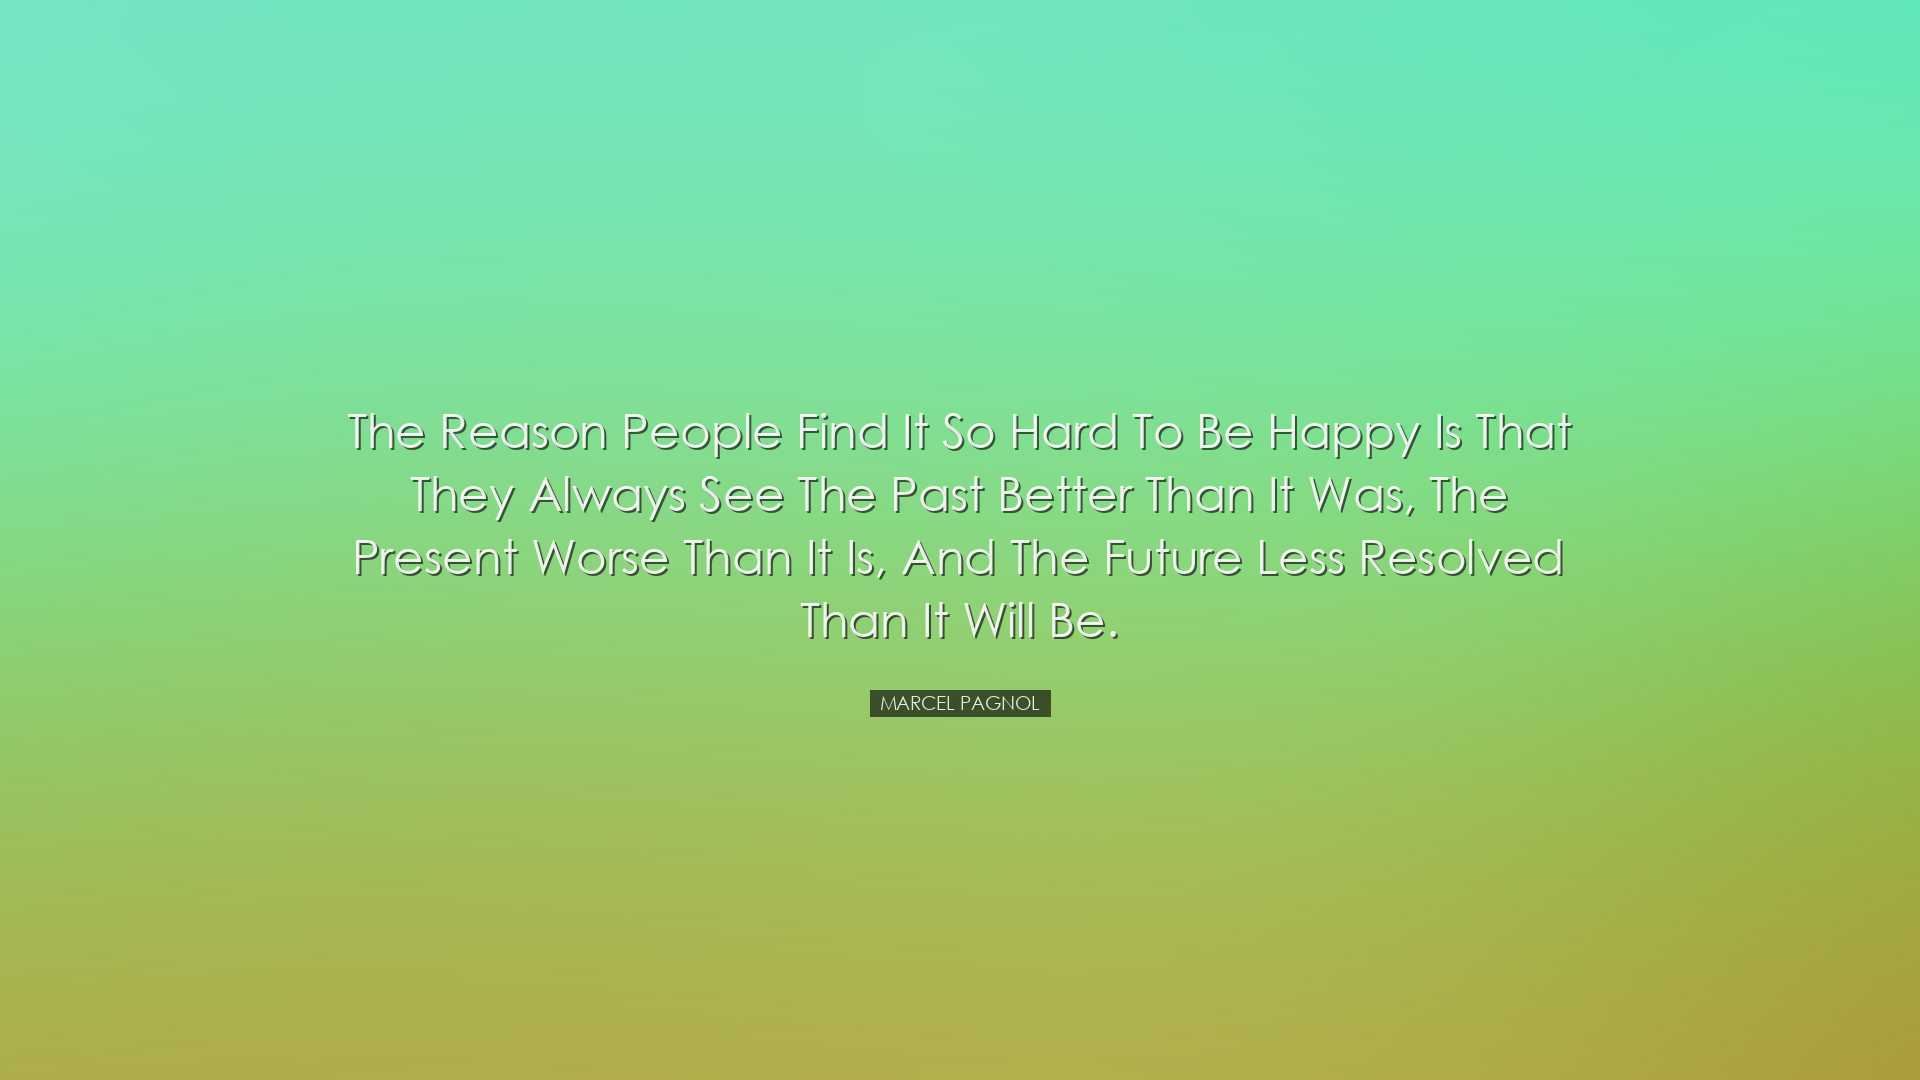 The reason people find it so hard to be happy is that they always